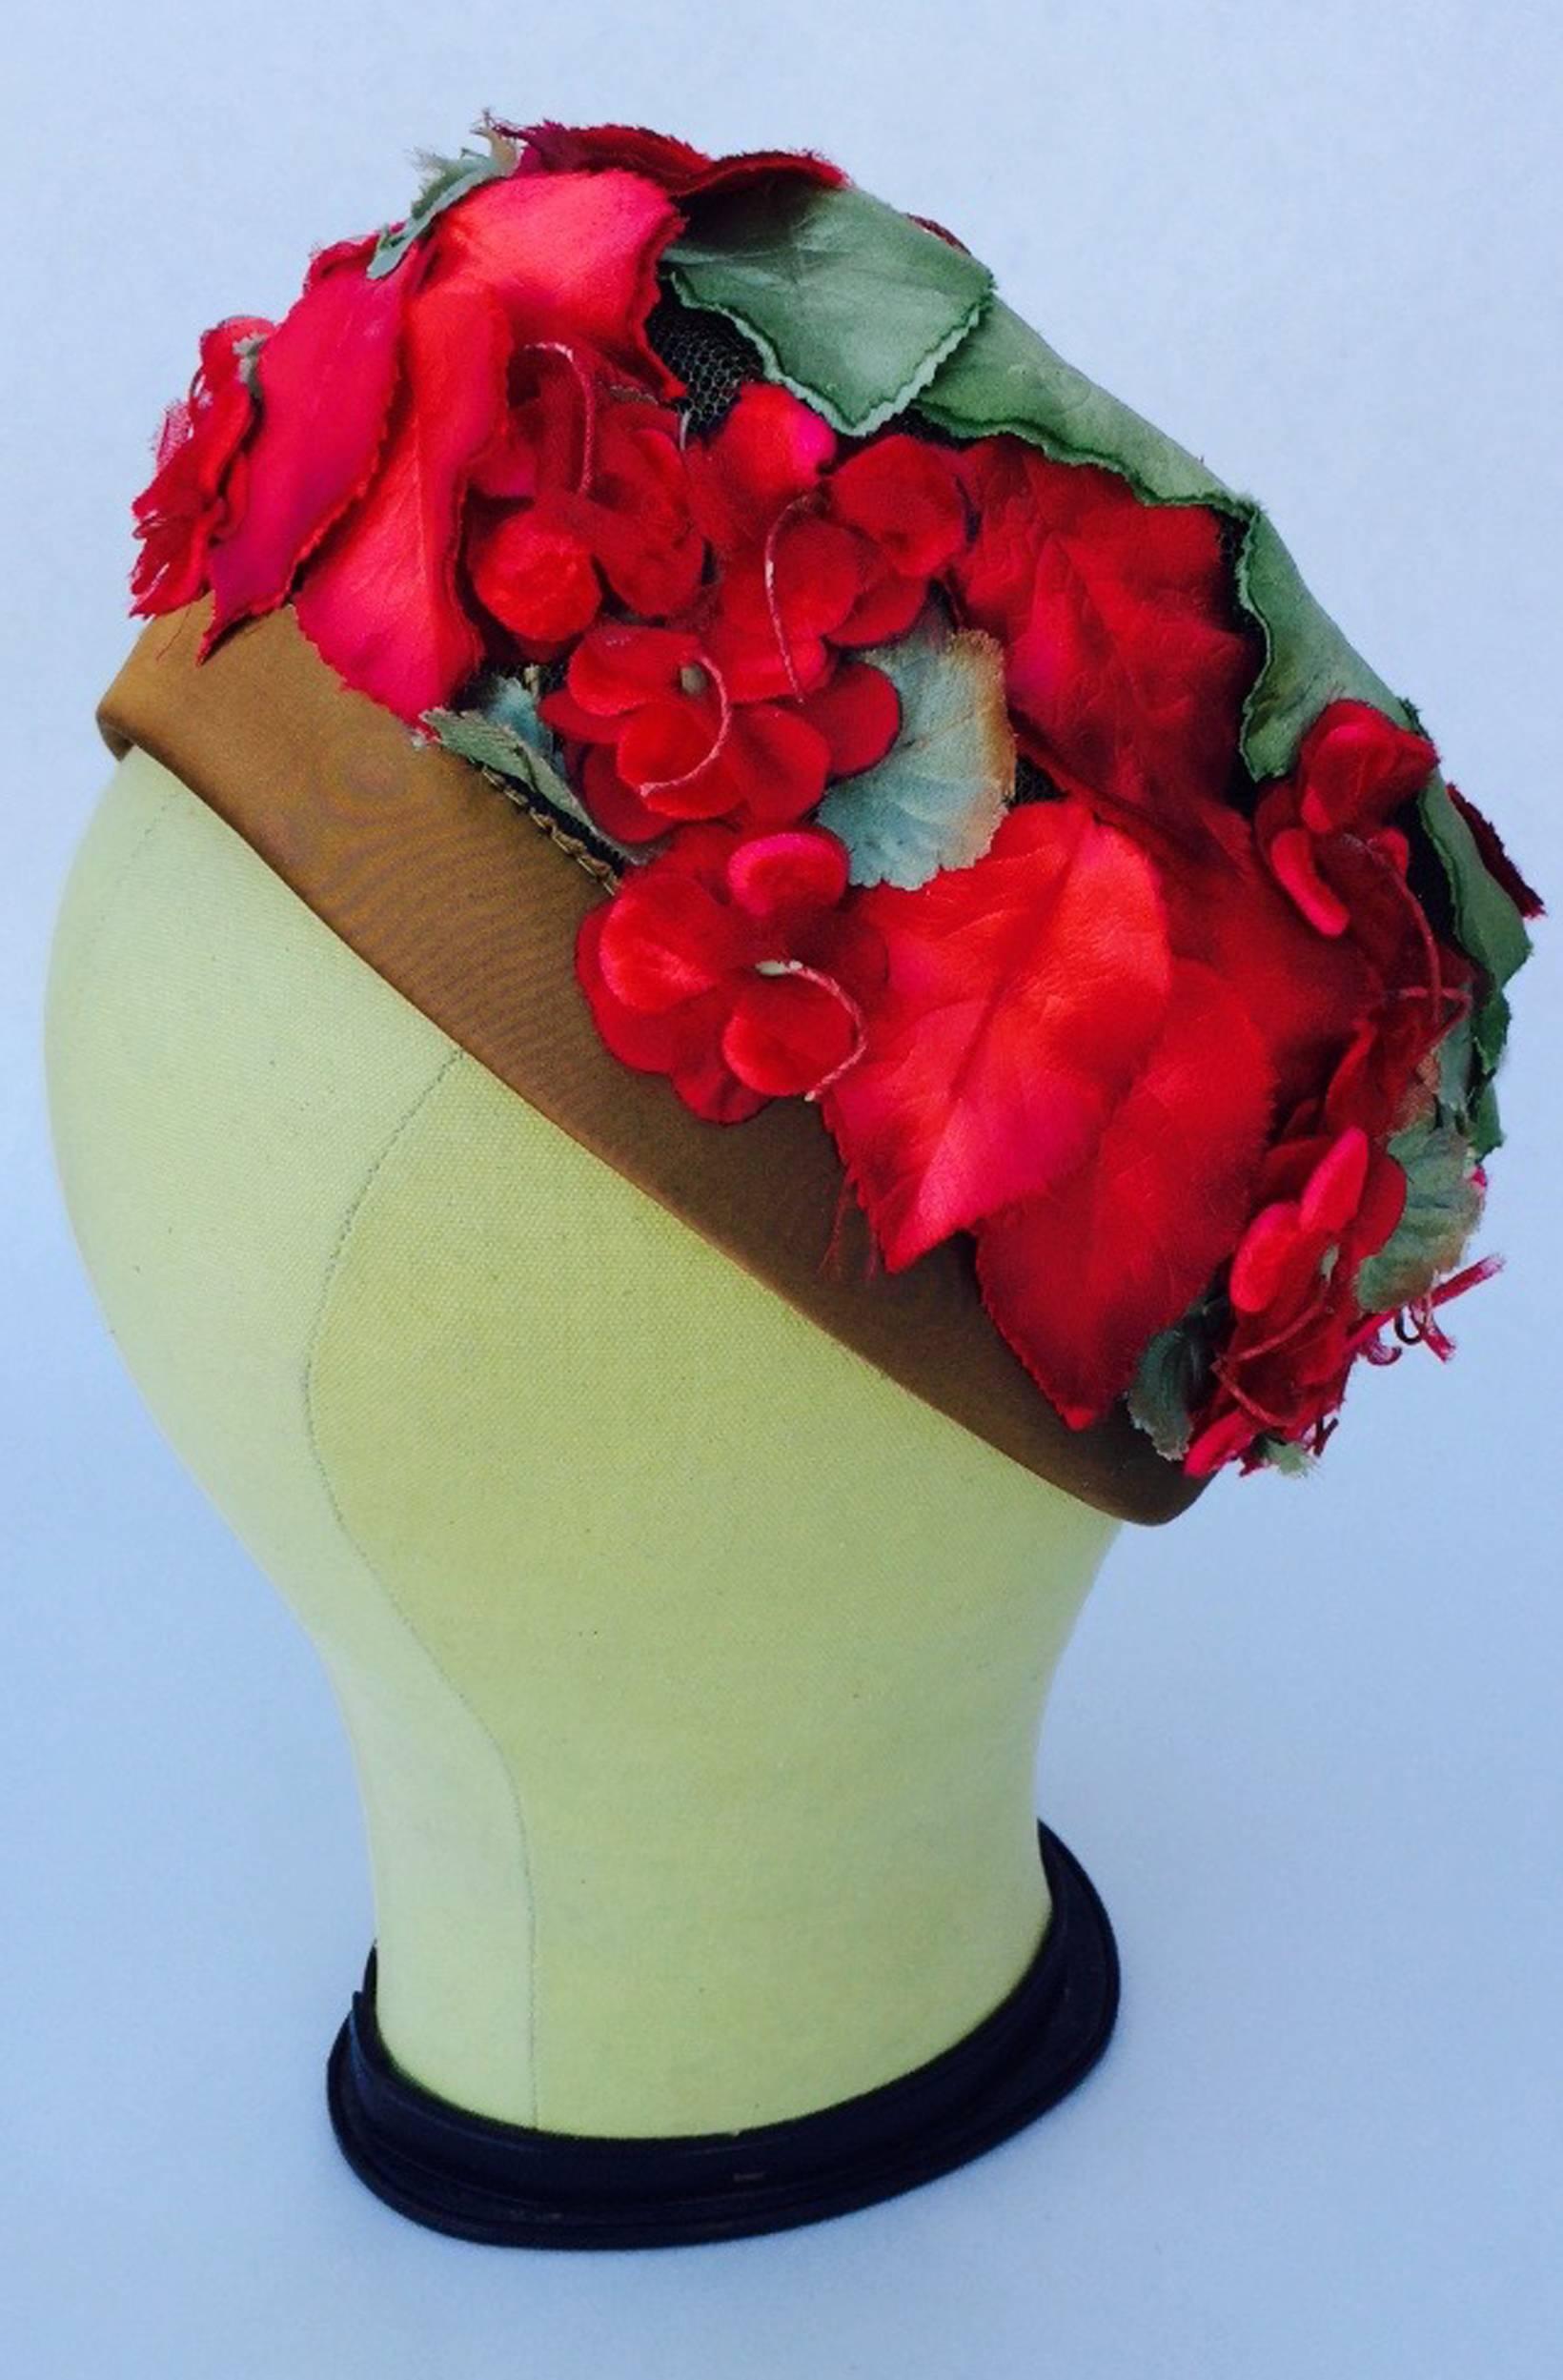 A fine vintage Schiaparelli floral trimmed turban. Authentic silk item features red and green flora on a olive silk trimmed turban. Item intact with no issues. Original shocking pink signature box intact. Excellent appears unworn.